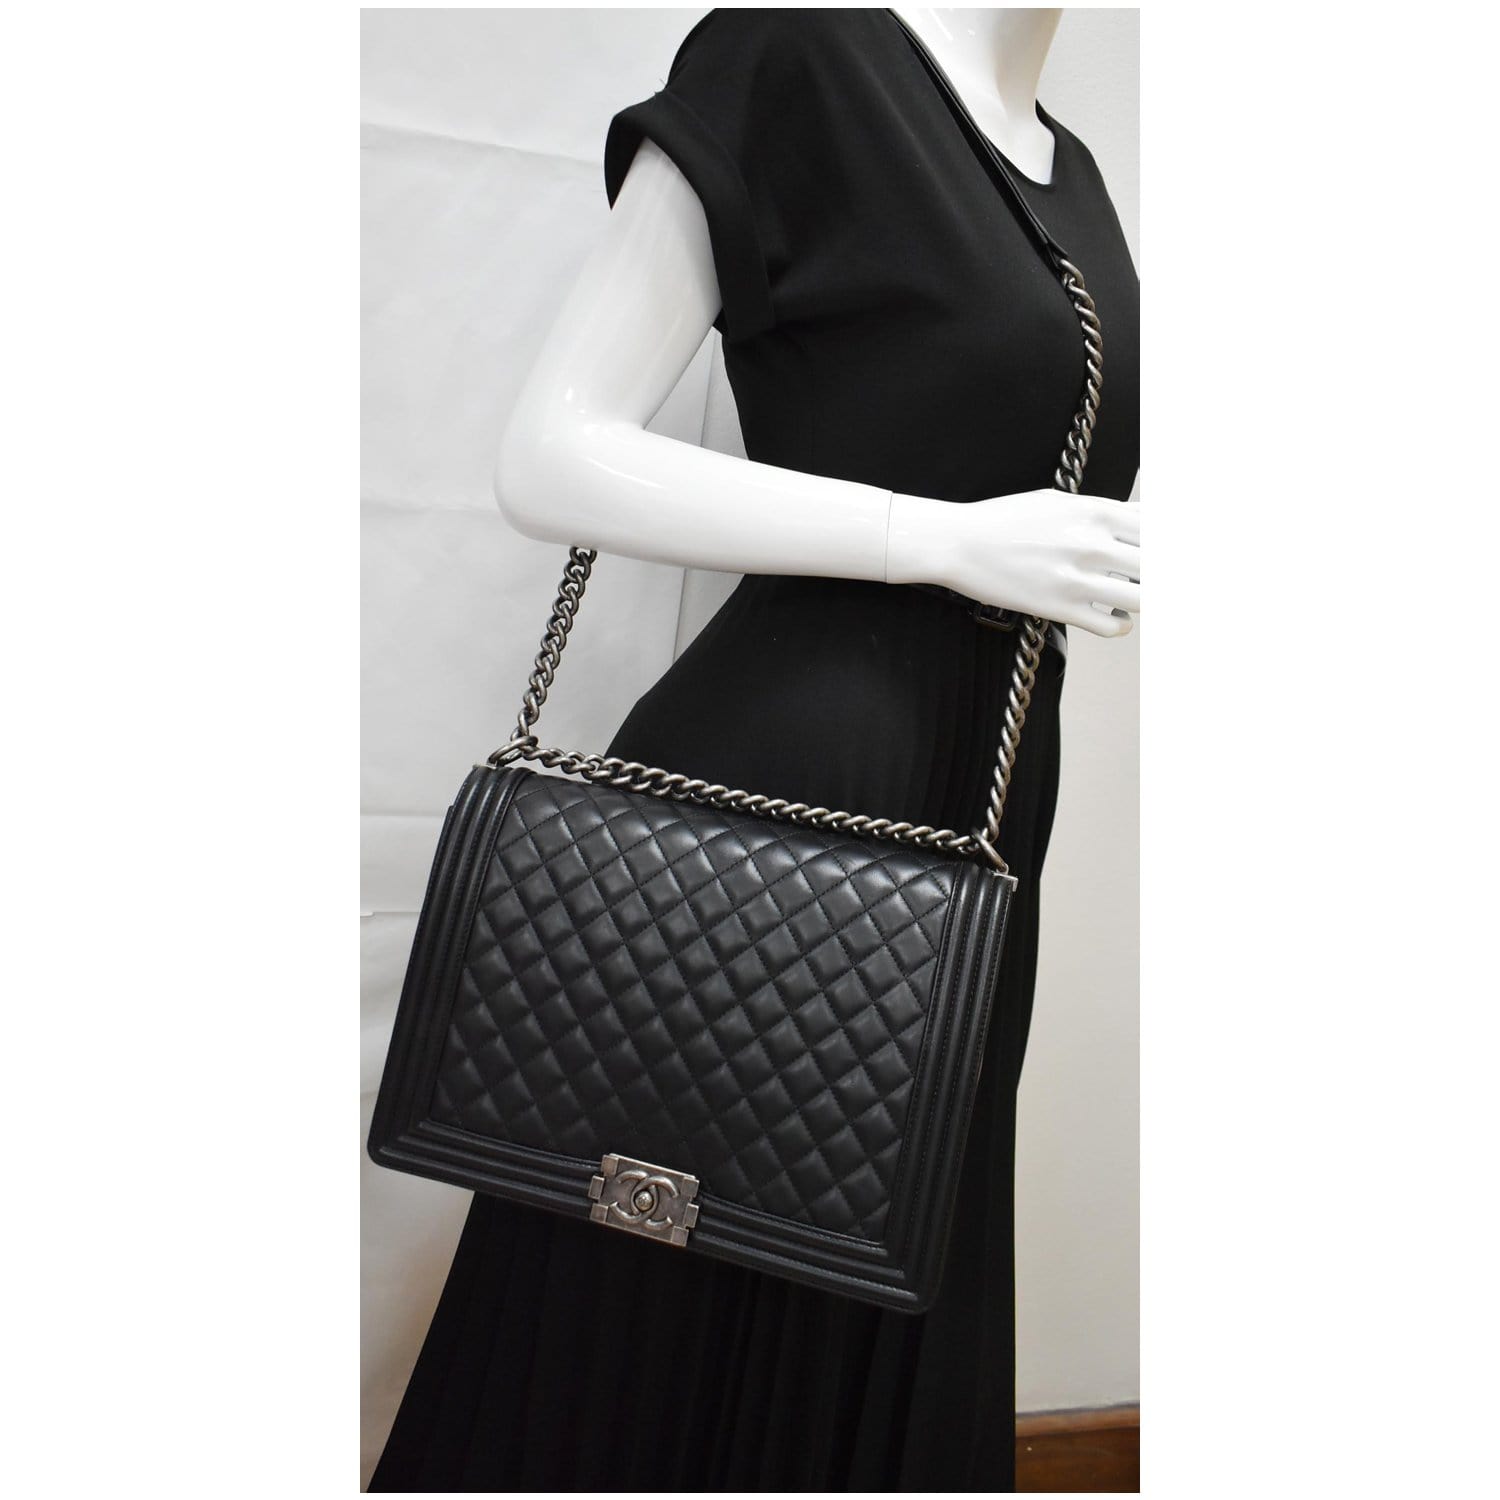 Chanel Black Quilted Leather Large Wild Stitch Boy Flap Bag Chanel